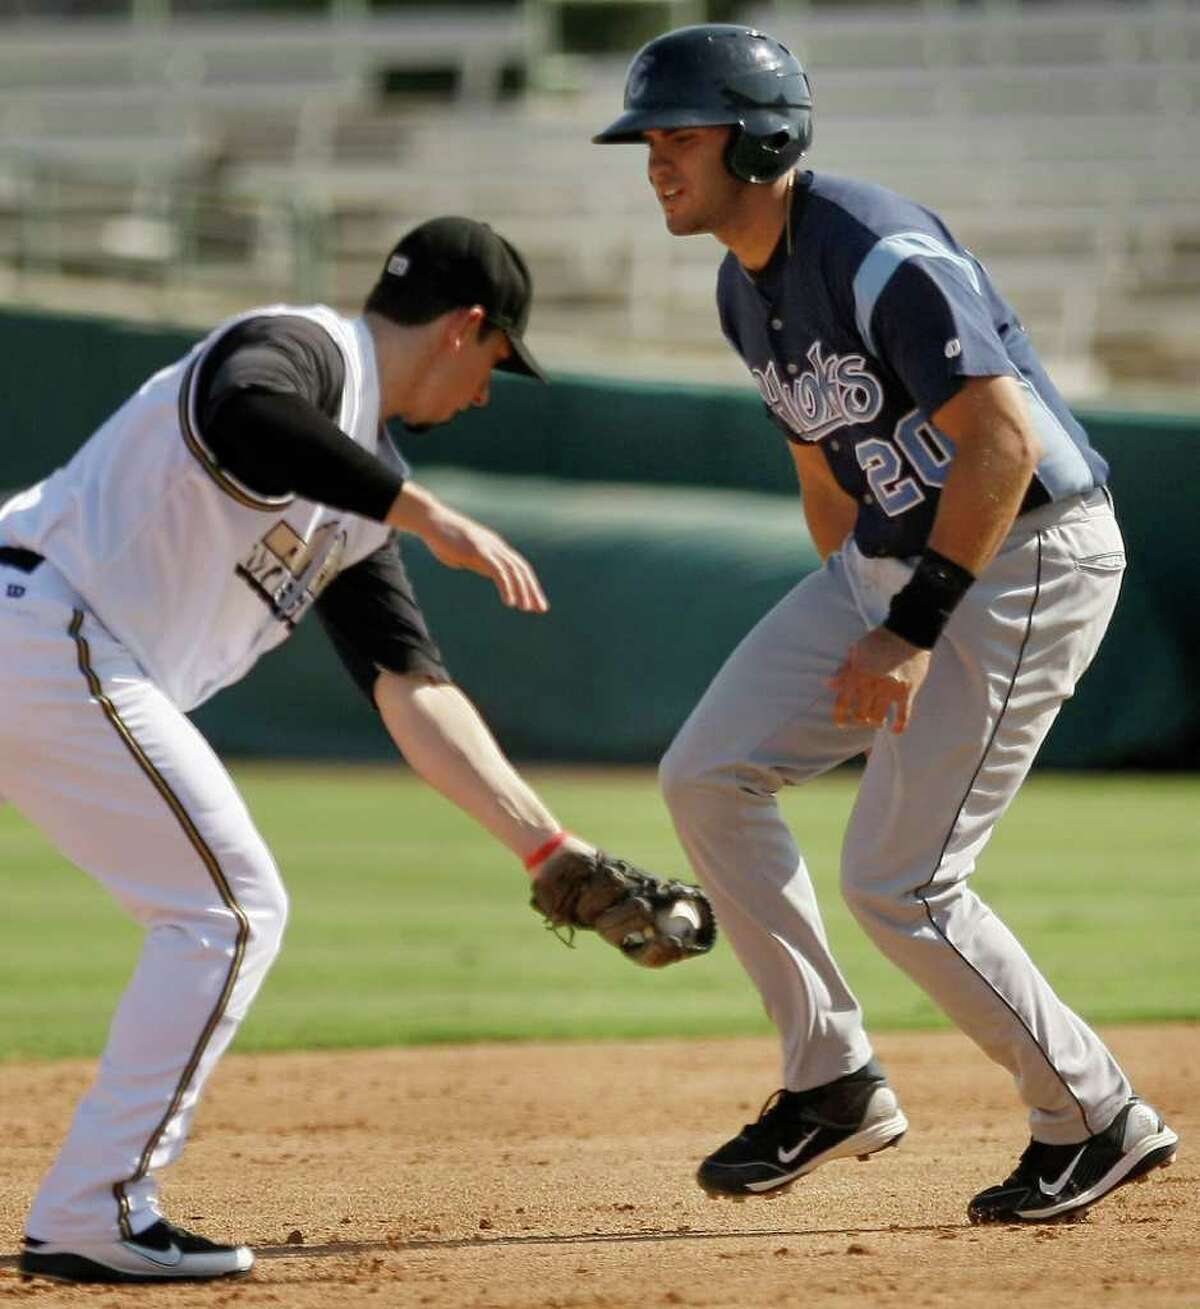 Corpus Christi Hooks' J.D. Martinez, right, is forced out at second by San Antonio MIssions' Anthony Contreras during a Texas league baseball game, Sunday, June 12, 2011, in San Antonio. San Antonio won 6-4.